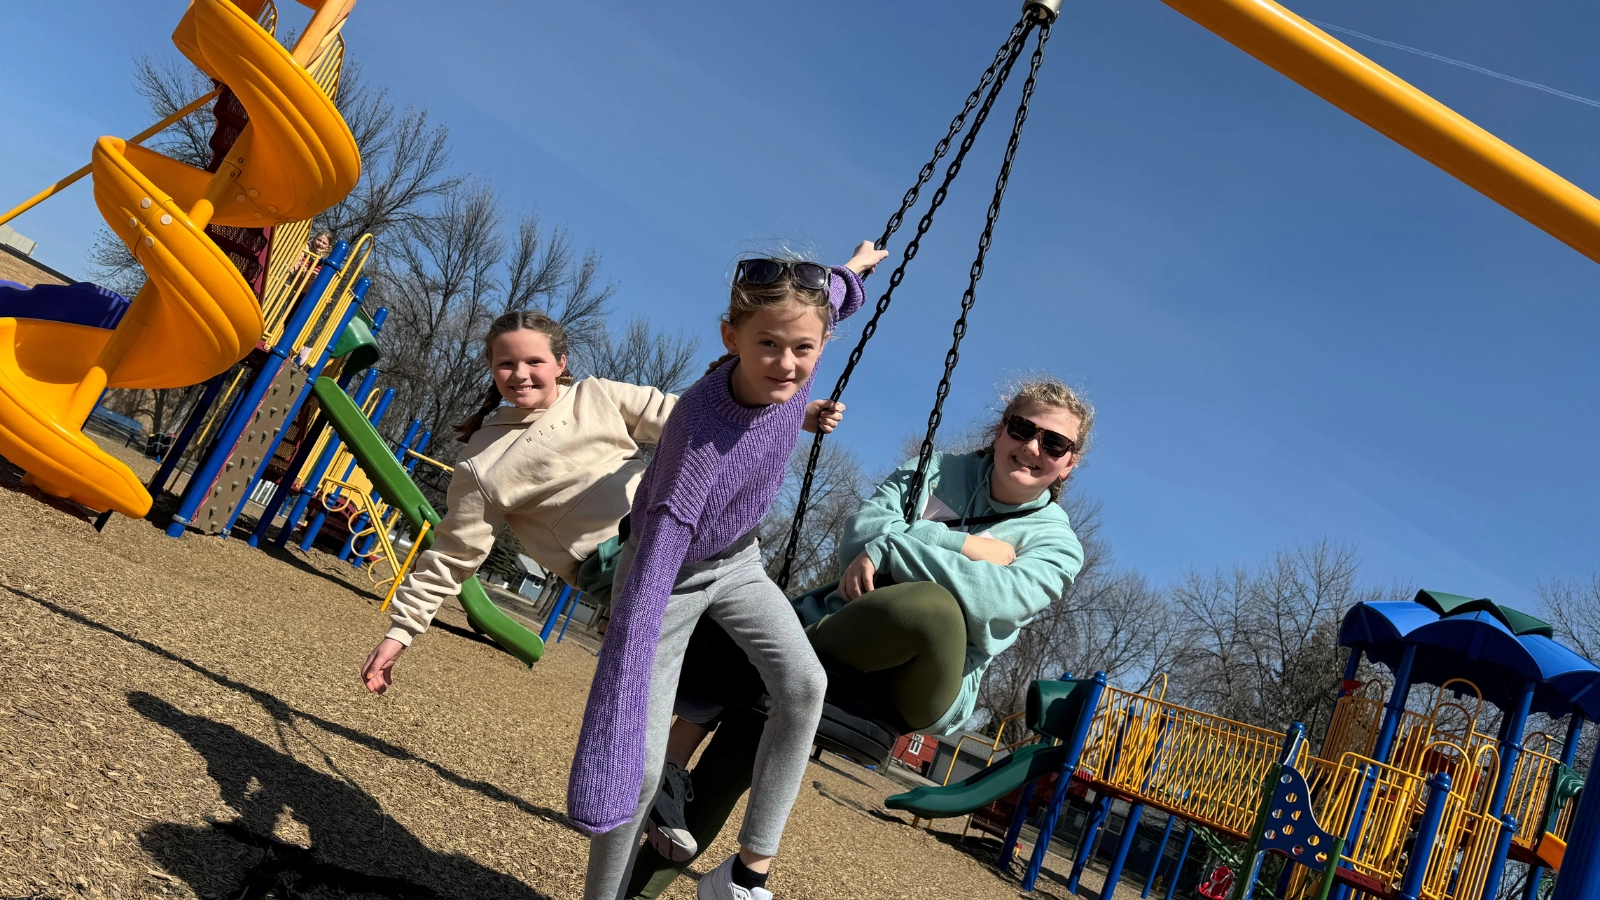 Three girls play on a tire swing at the park with slide in view.